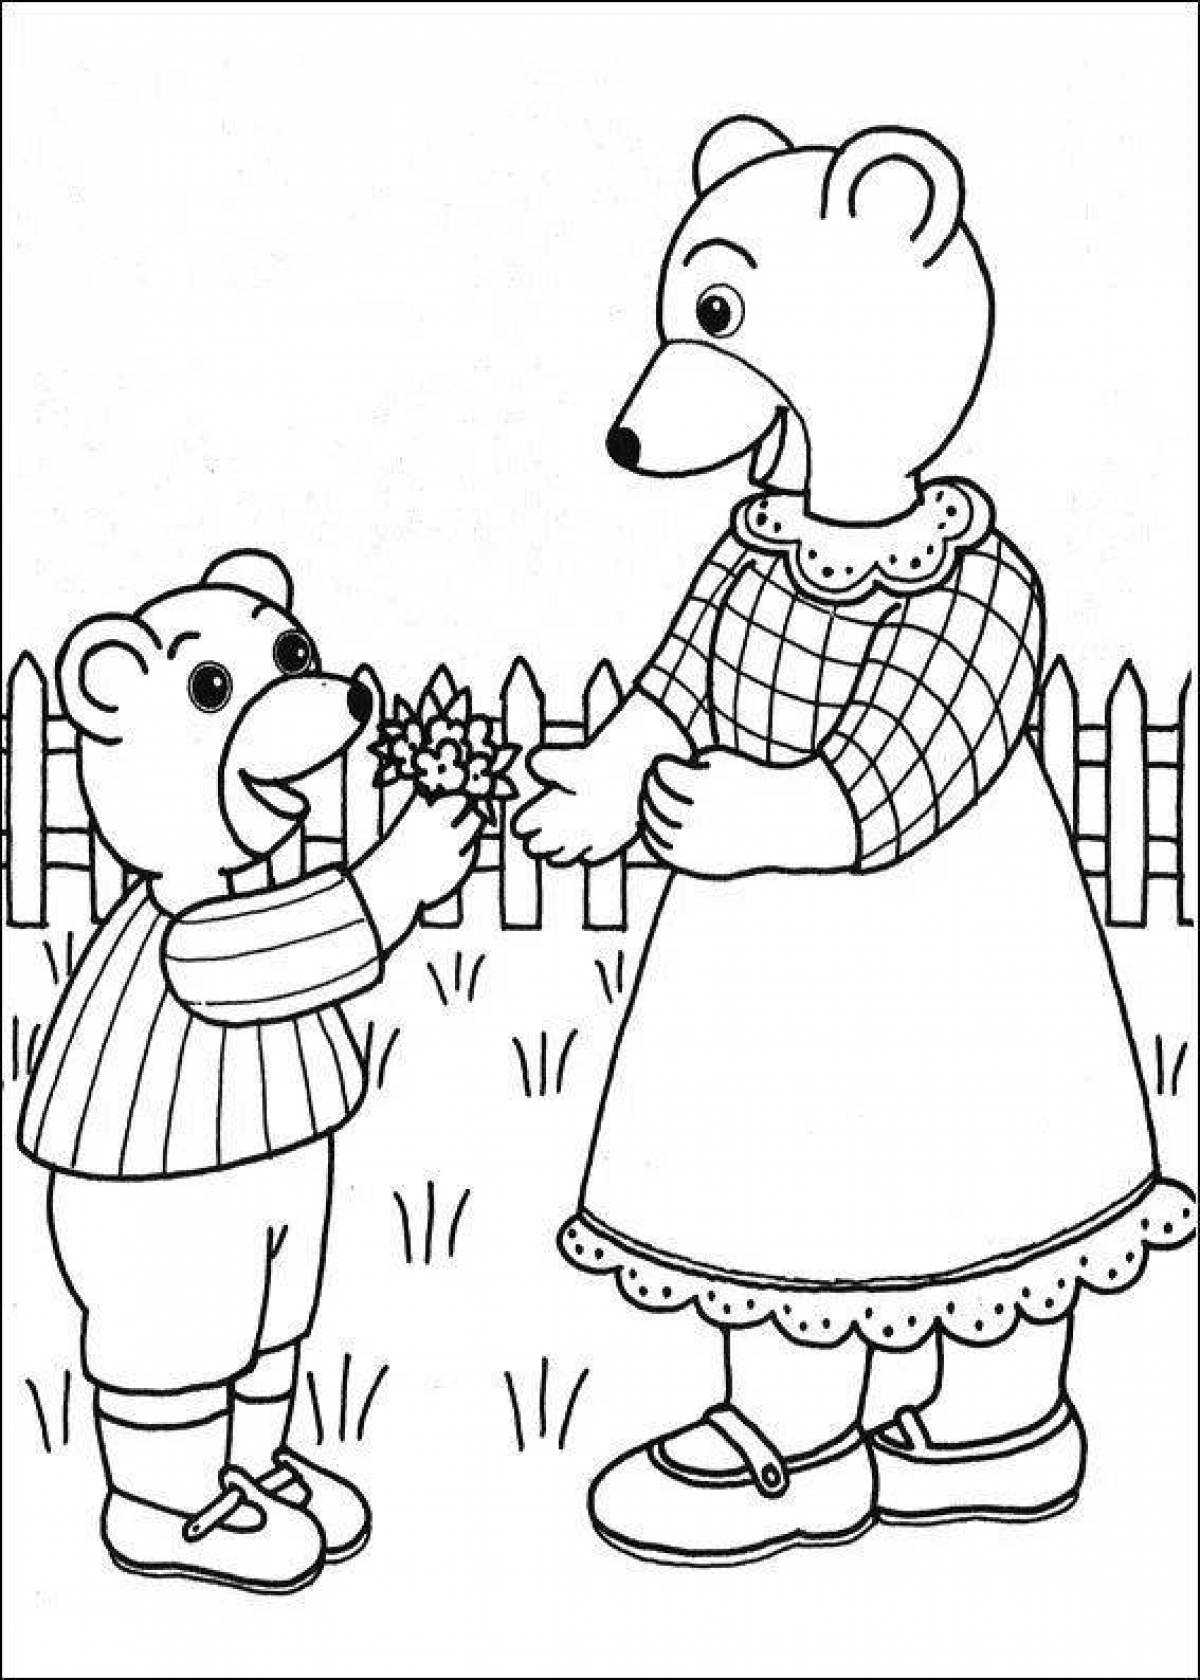 Two greedy teddy bears cute coloring book